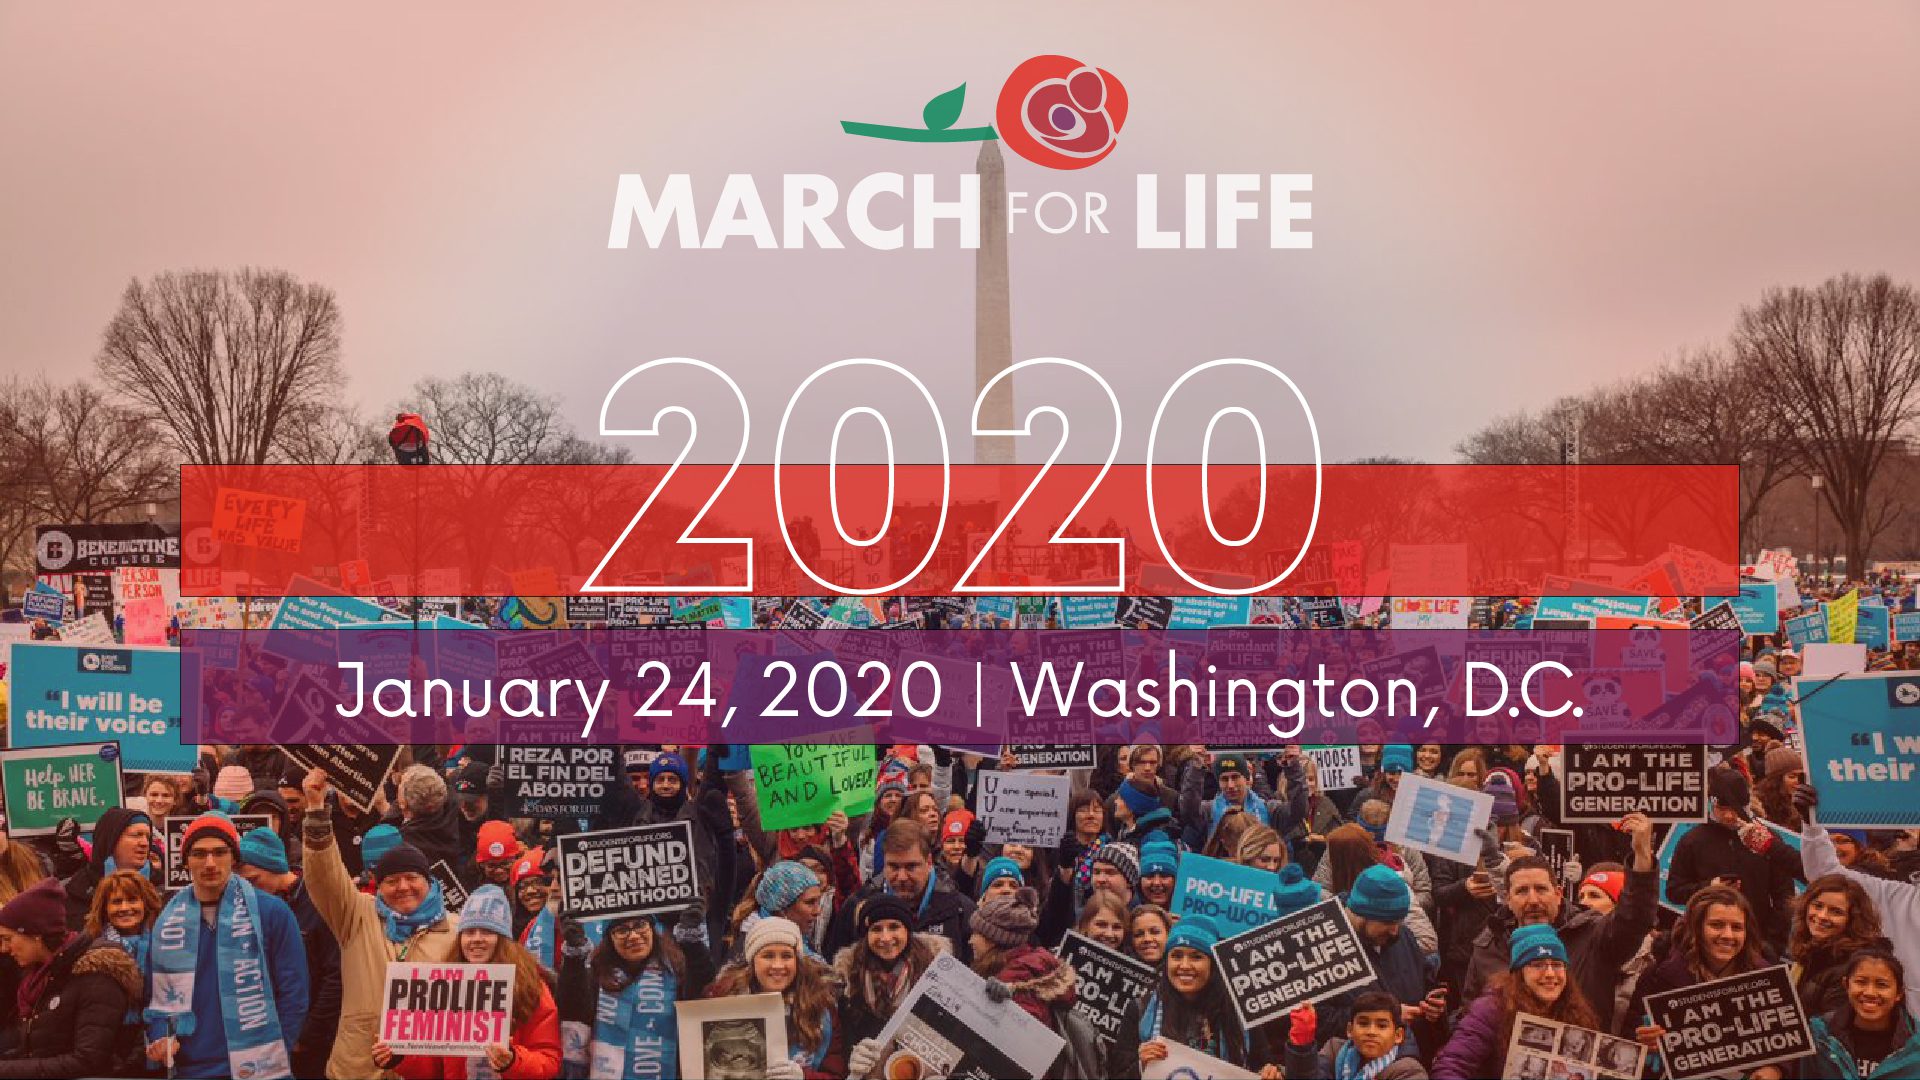 3 Months Until the 2020 March for Life! - March For Life1920 x 1080